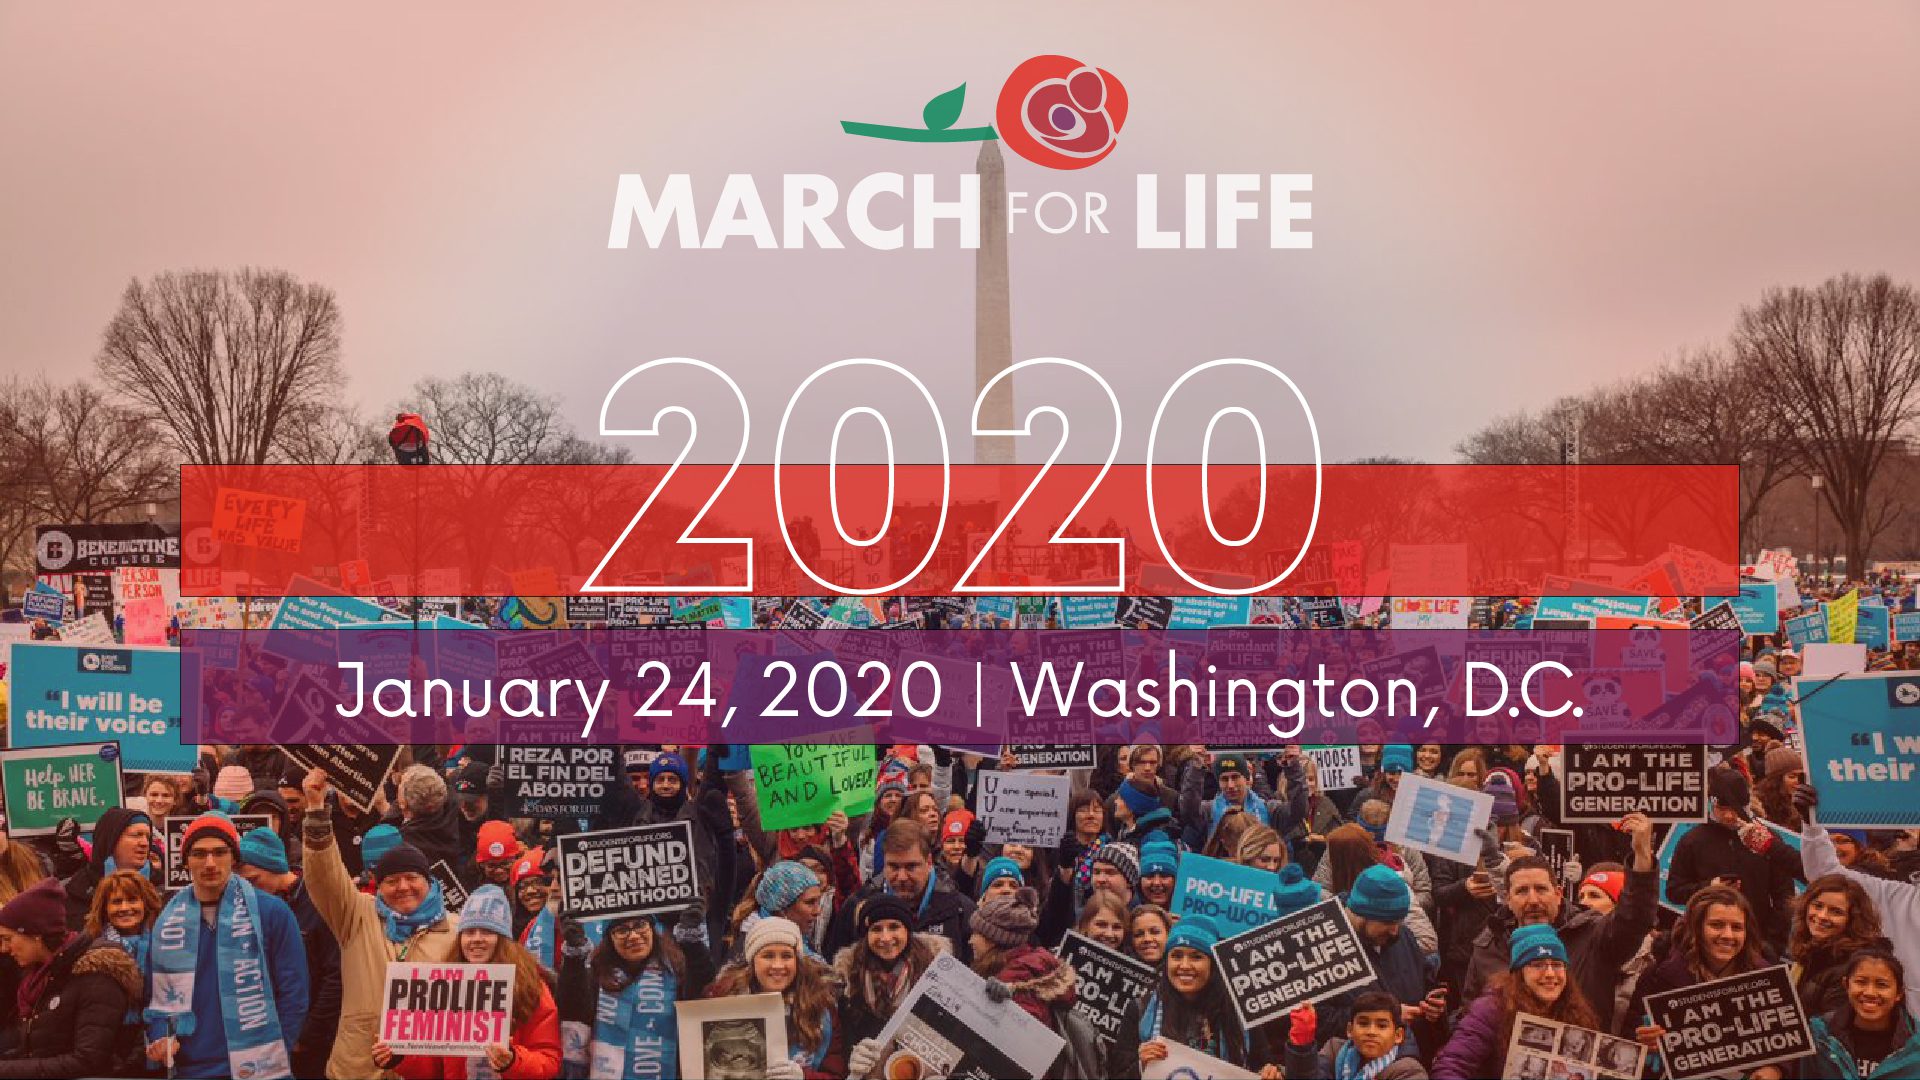 3 Months Until the 2020 March for Life! - March For Life1920 x 1080